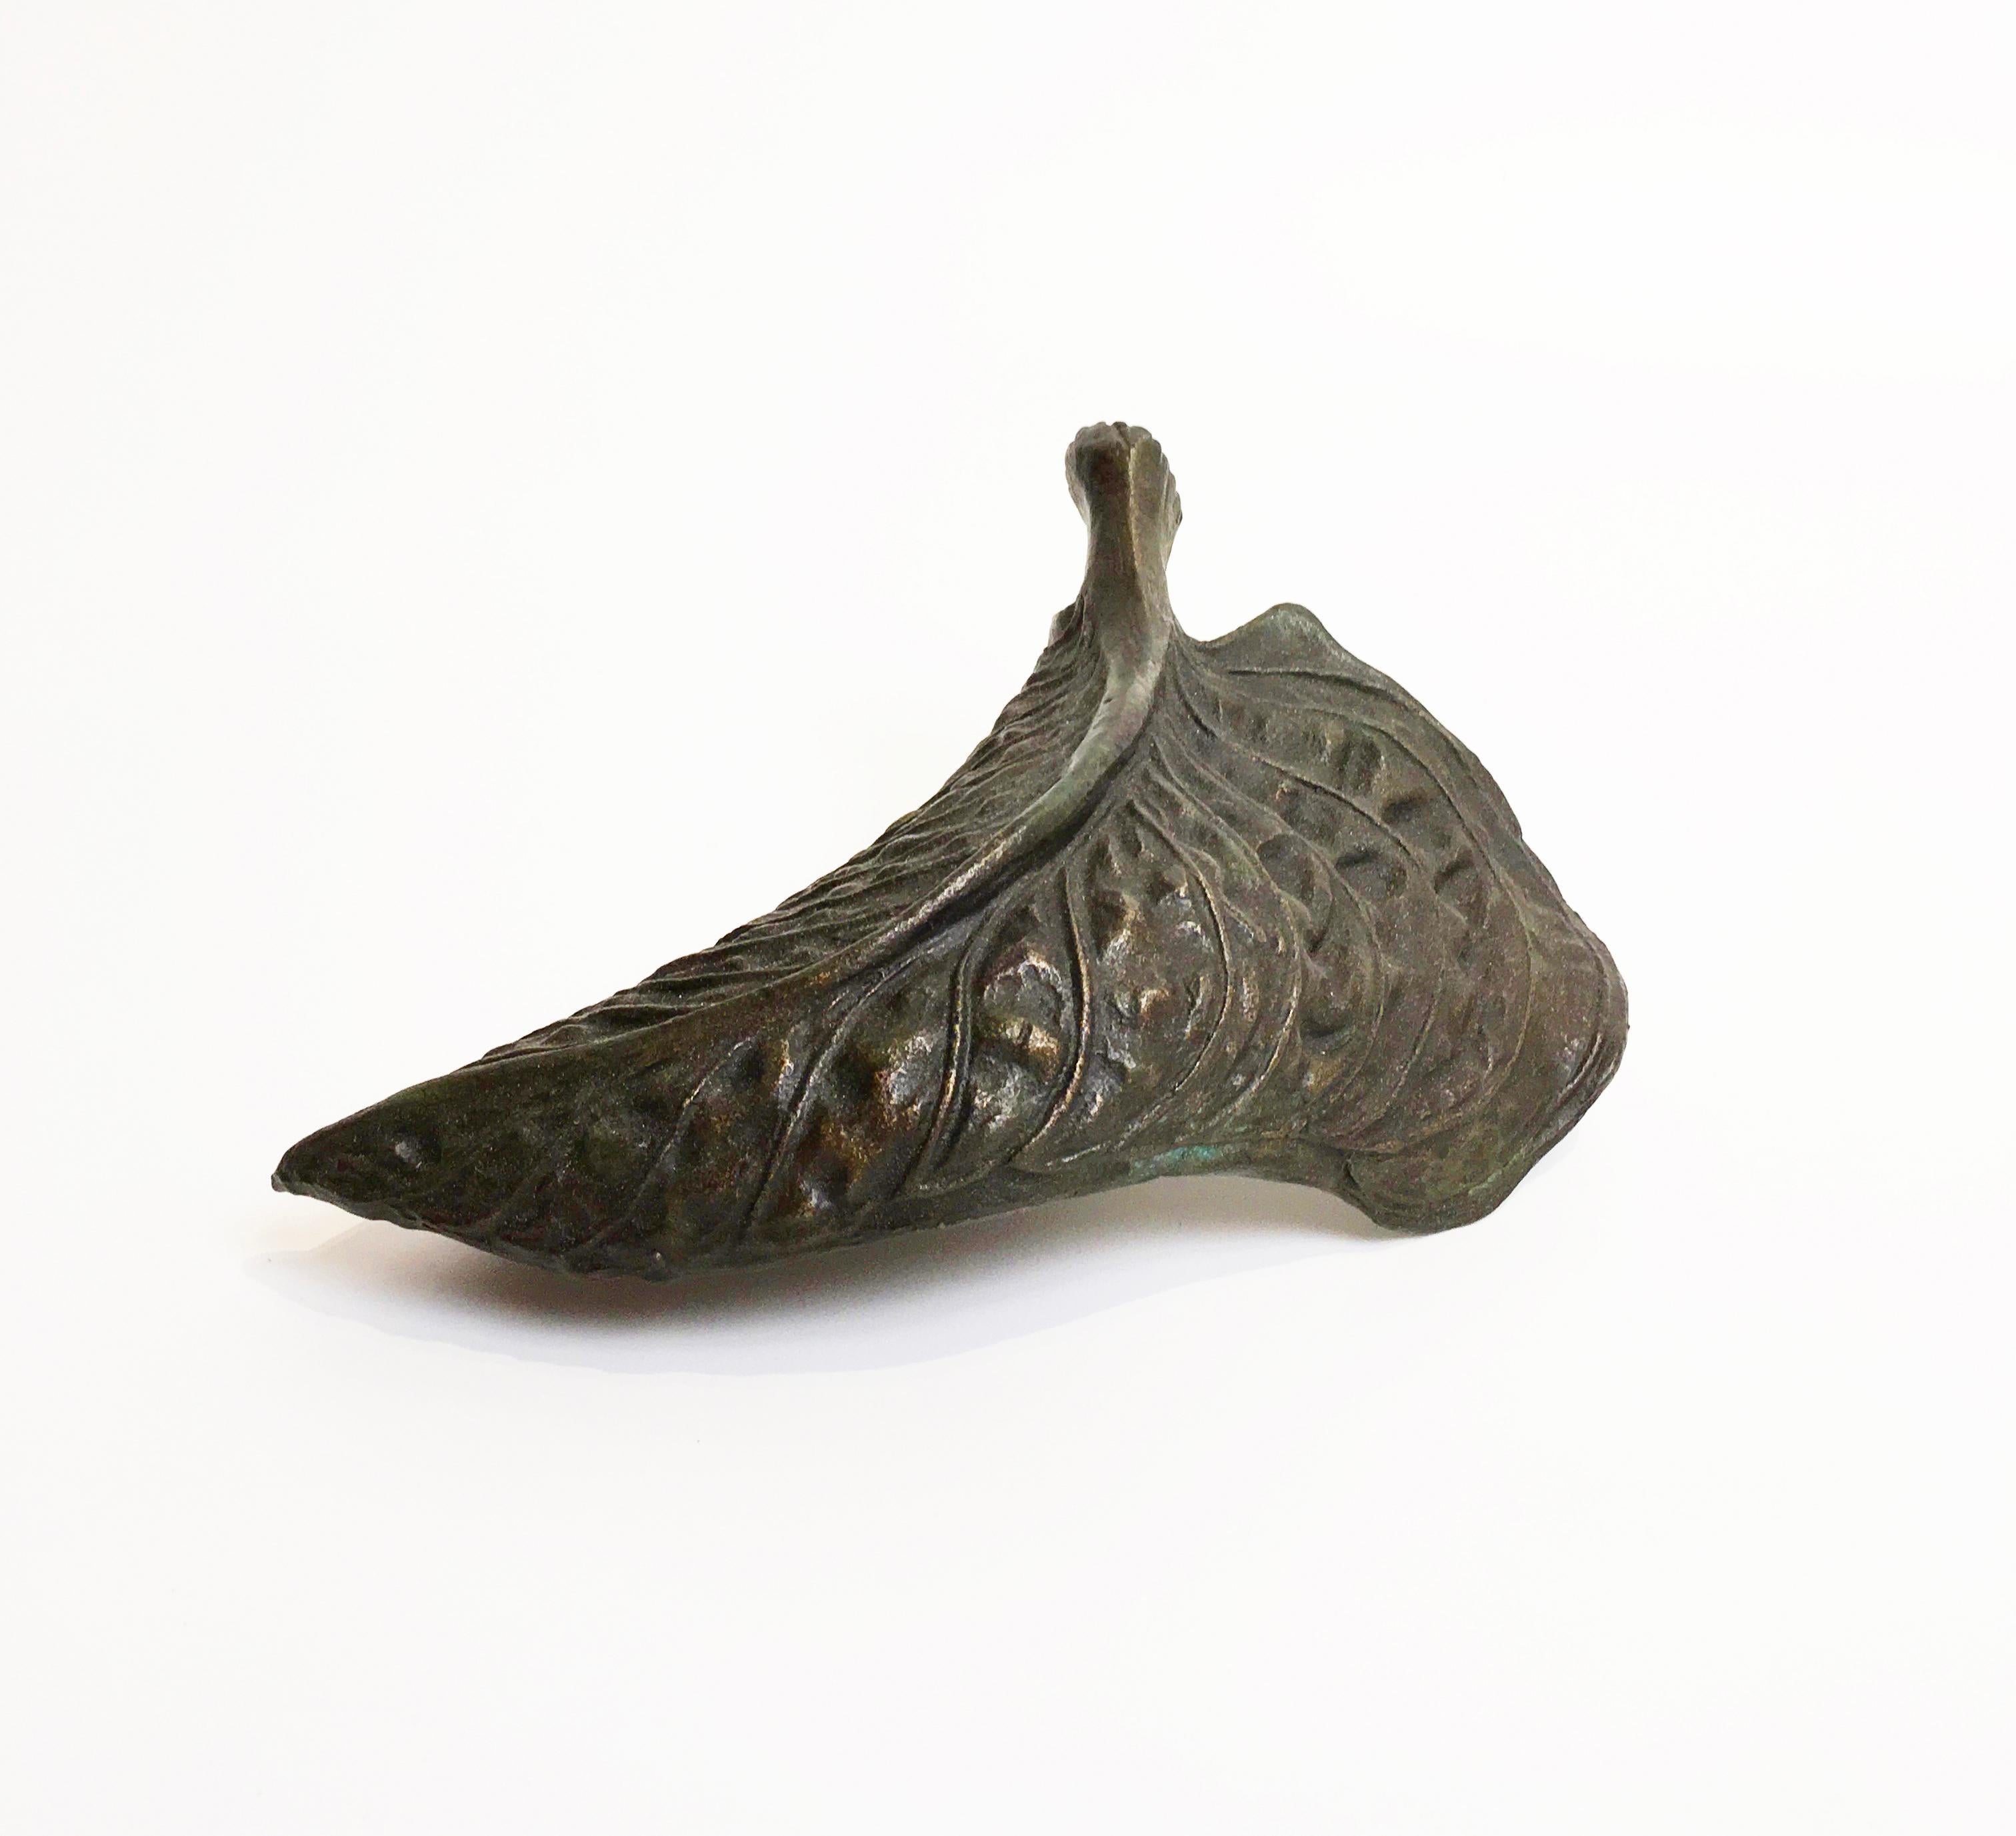 This small bronze sculpture is a maquette for a large scale sculpture at the Olbrich Gardens in Madison, Wisconsin. Made with the ancient lost wax method, a process dating back to the 3rd millennium BC, in which the hosta leaf is carved in wax then